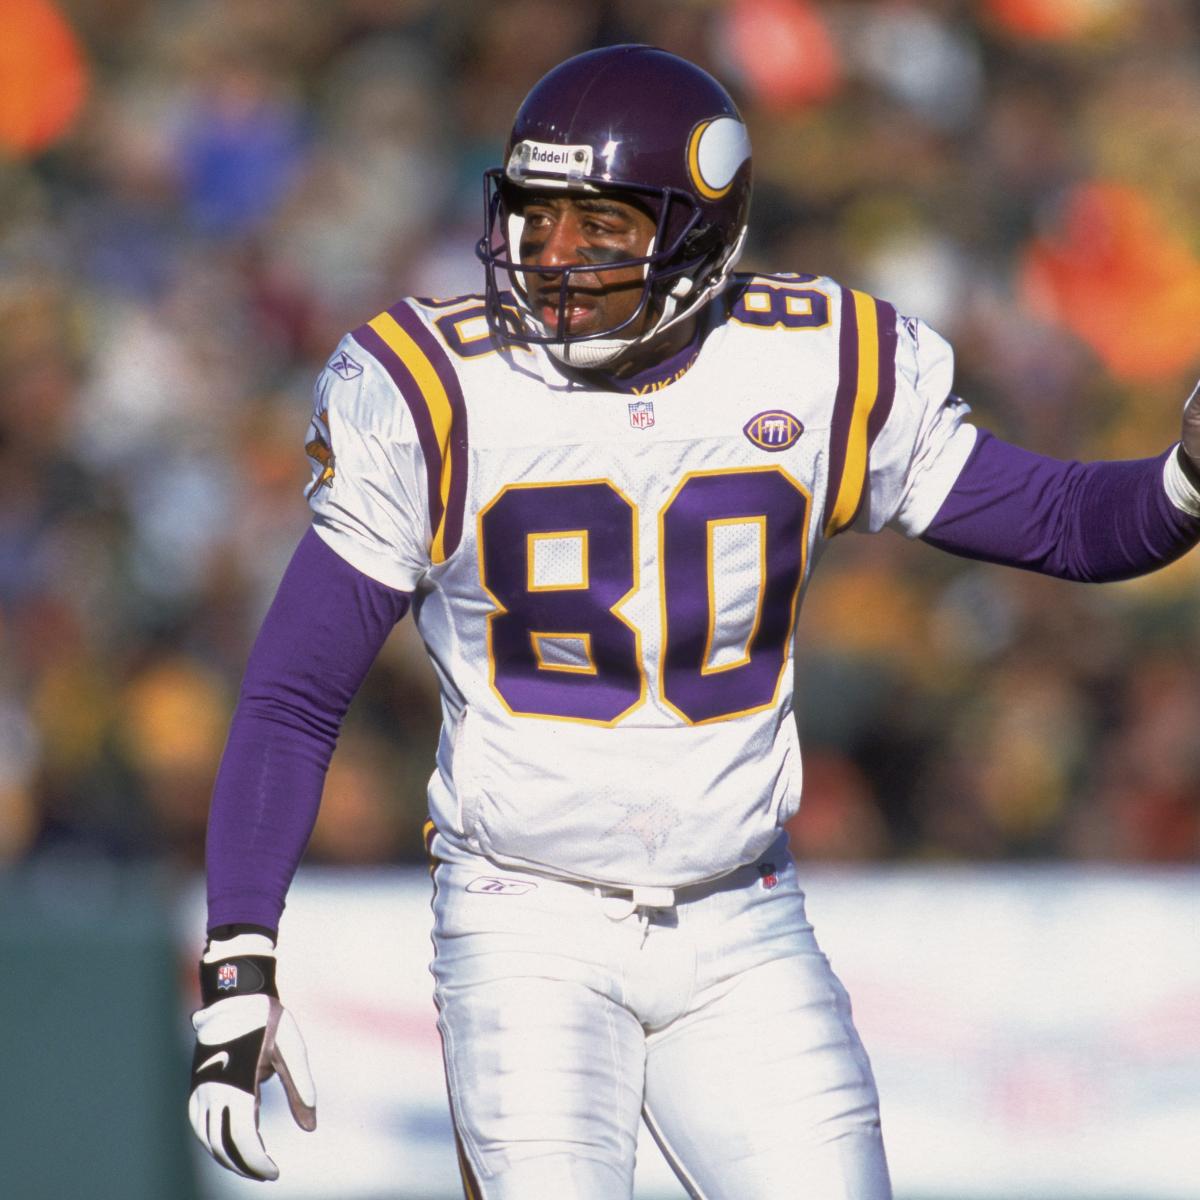 Cris Carter Remembering the Career of a Legendary NFL Wide Receiver